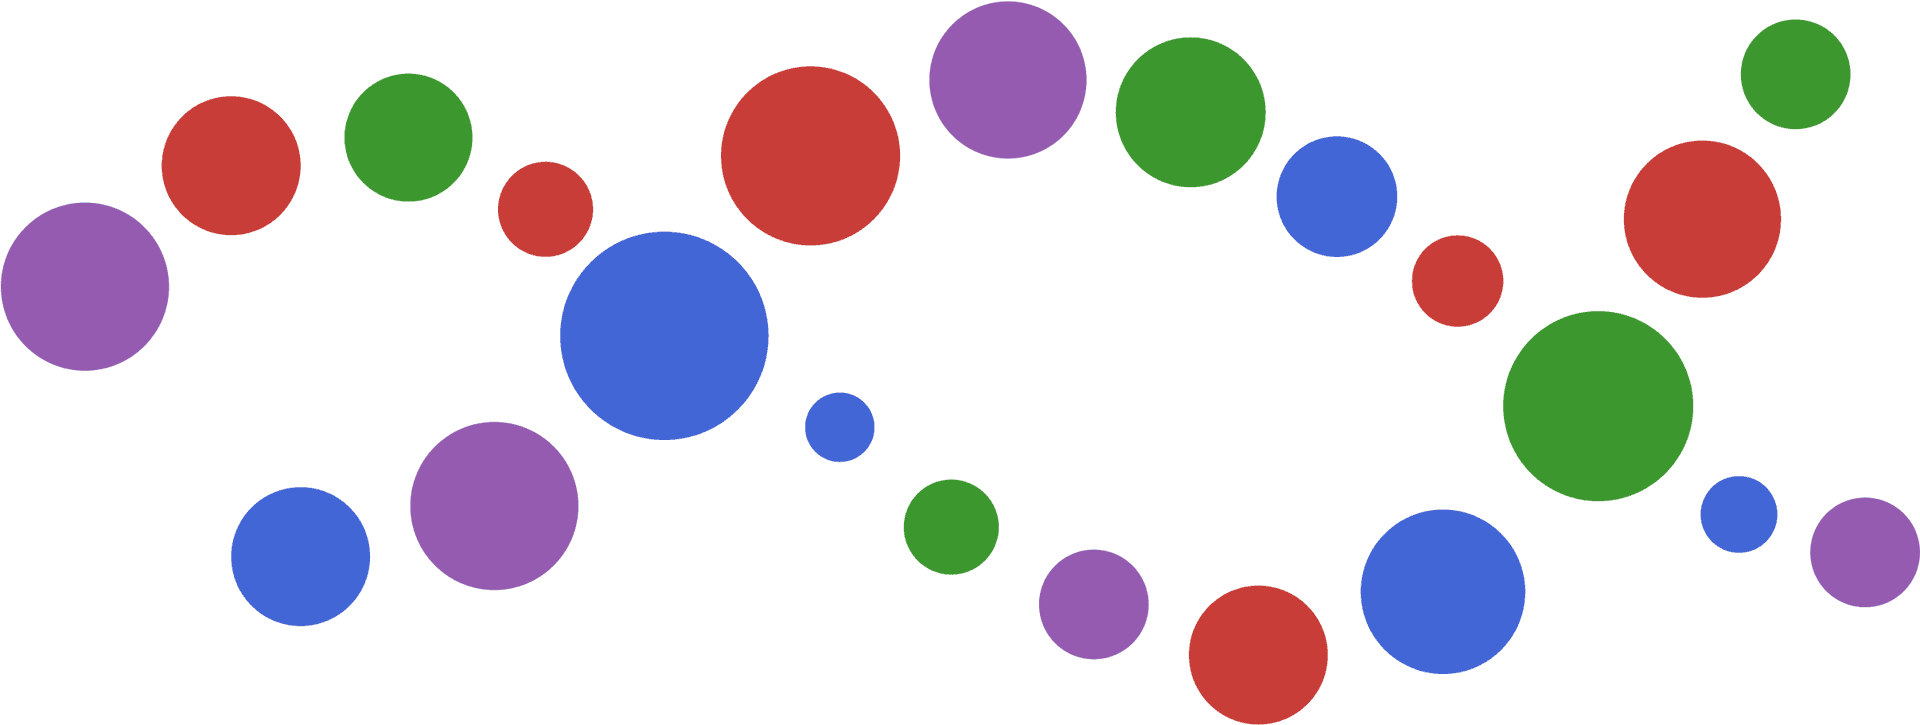 Abstract Colorful Circles Pattern PNG image